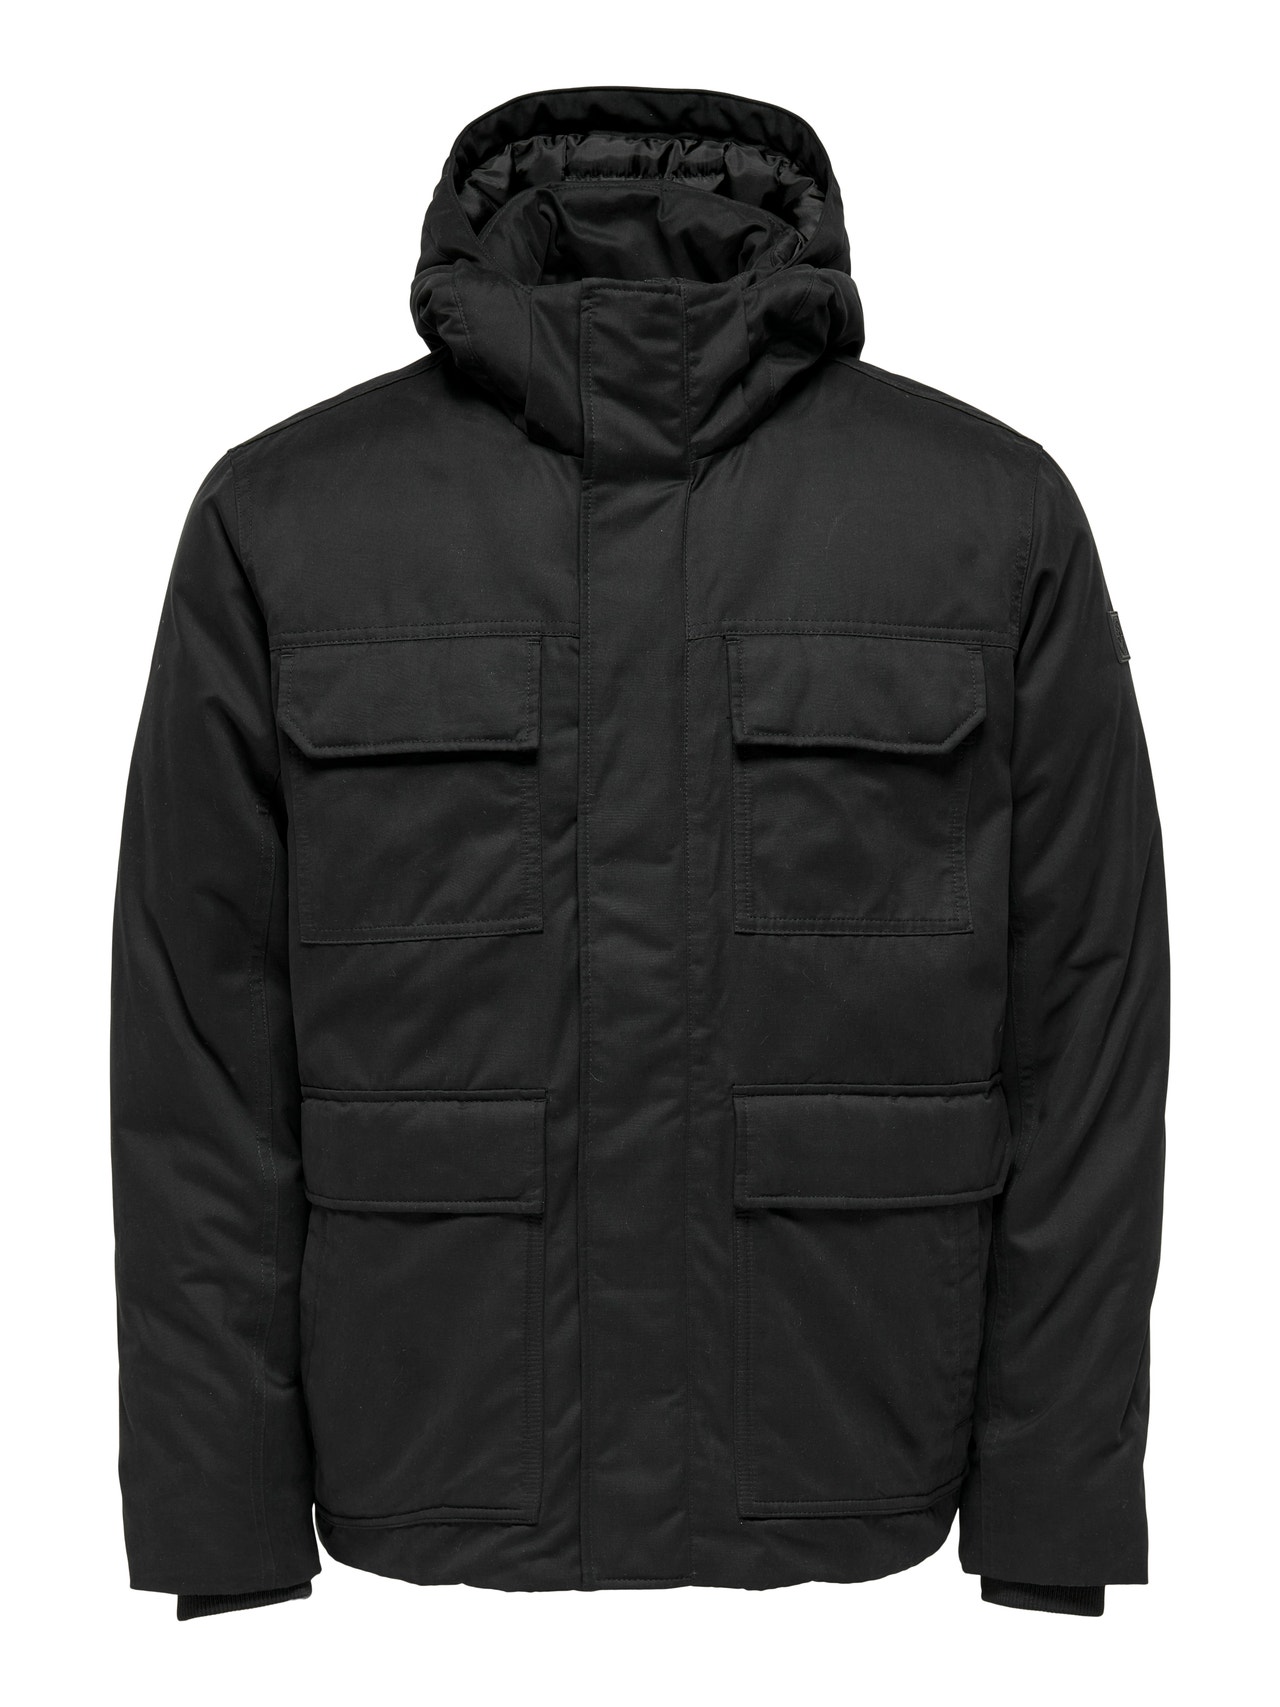 ONLY & SONS Jacket with hood -Black - 22022466